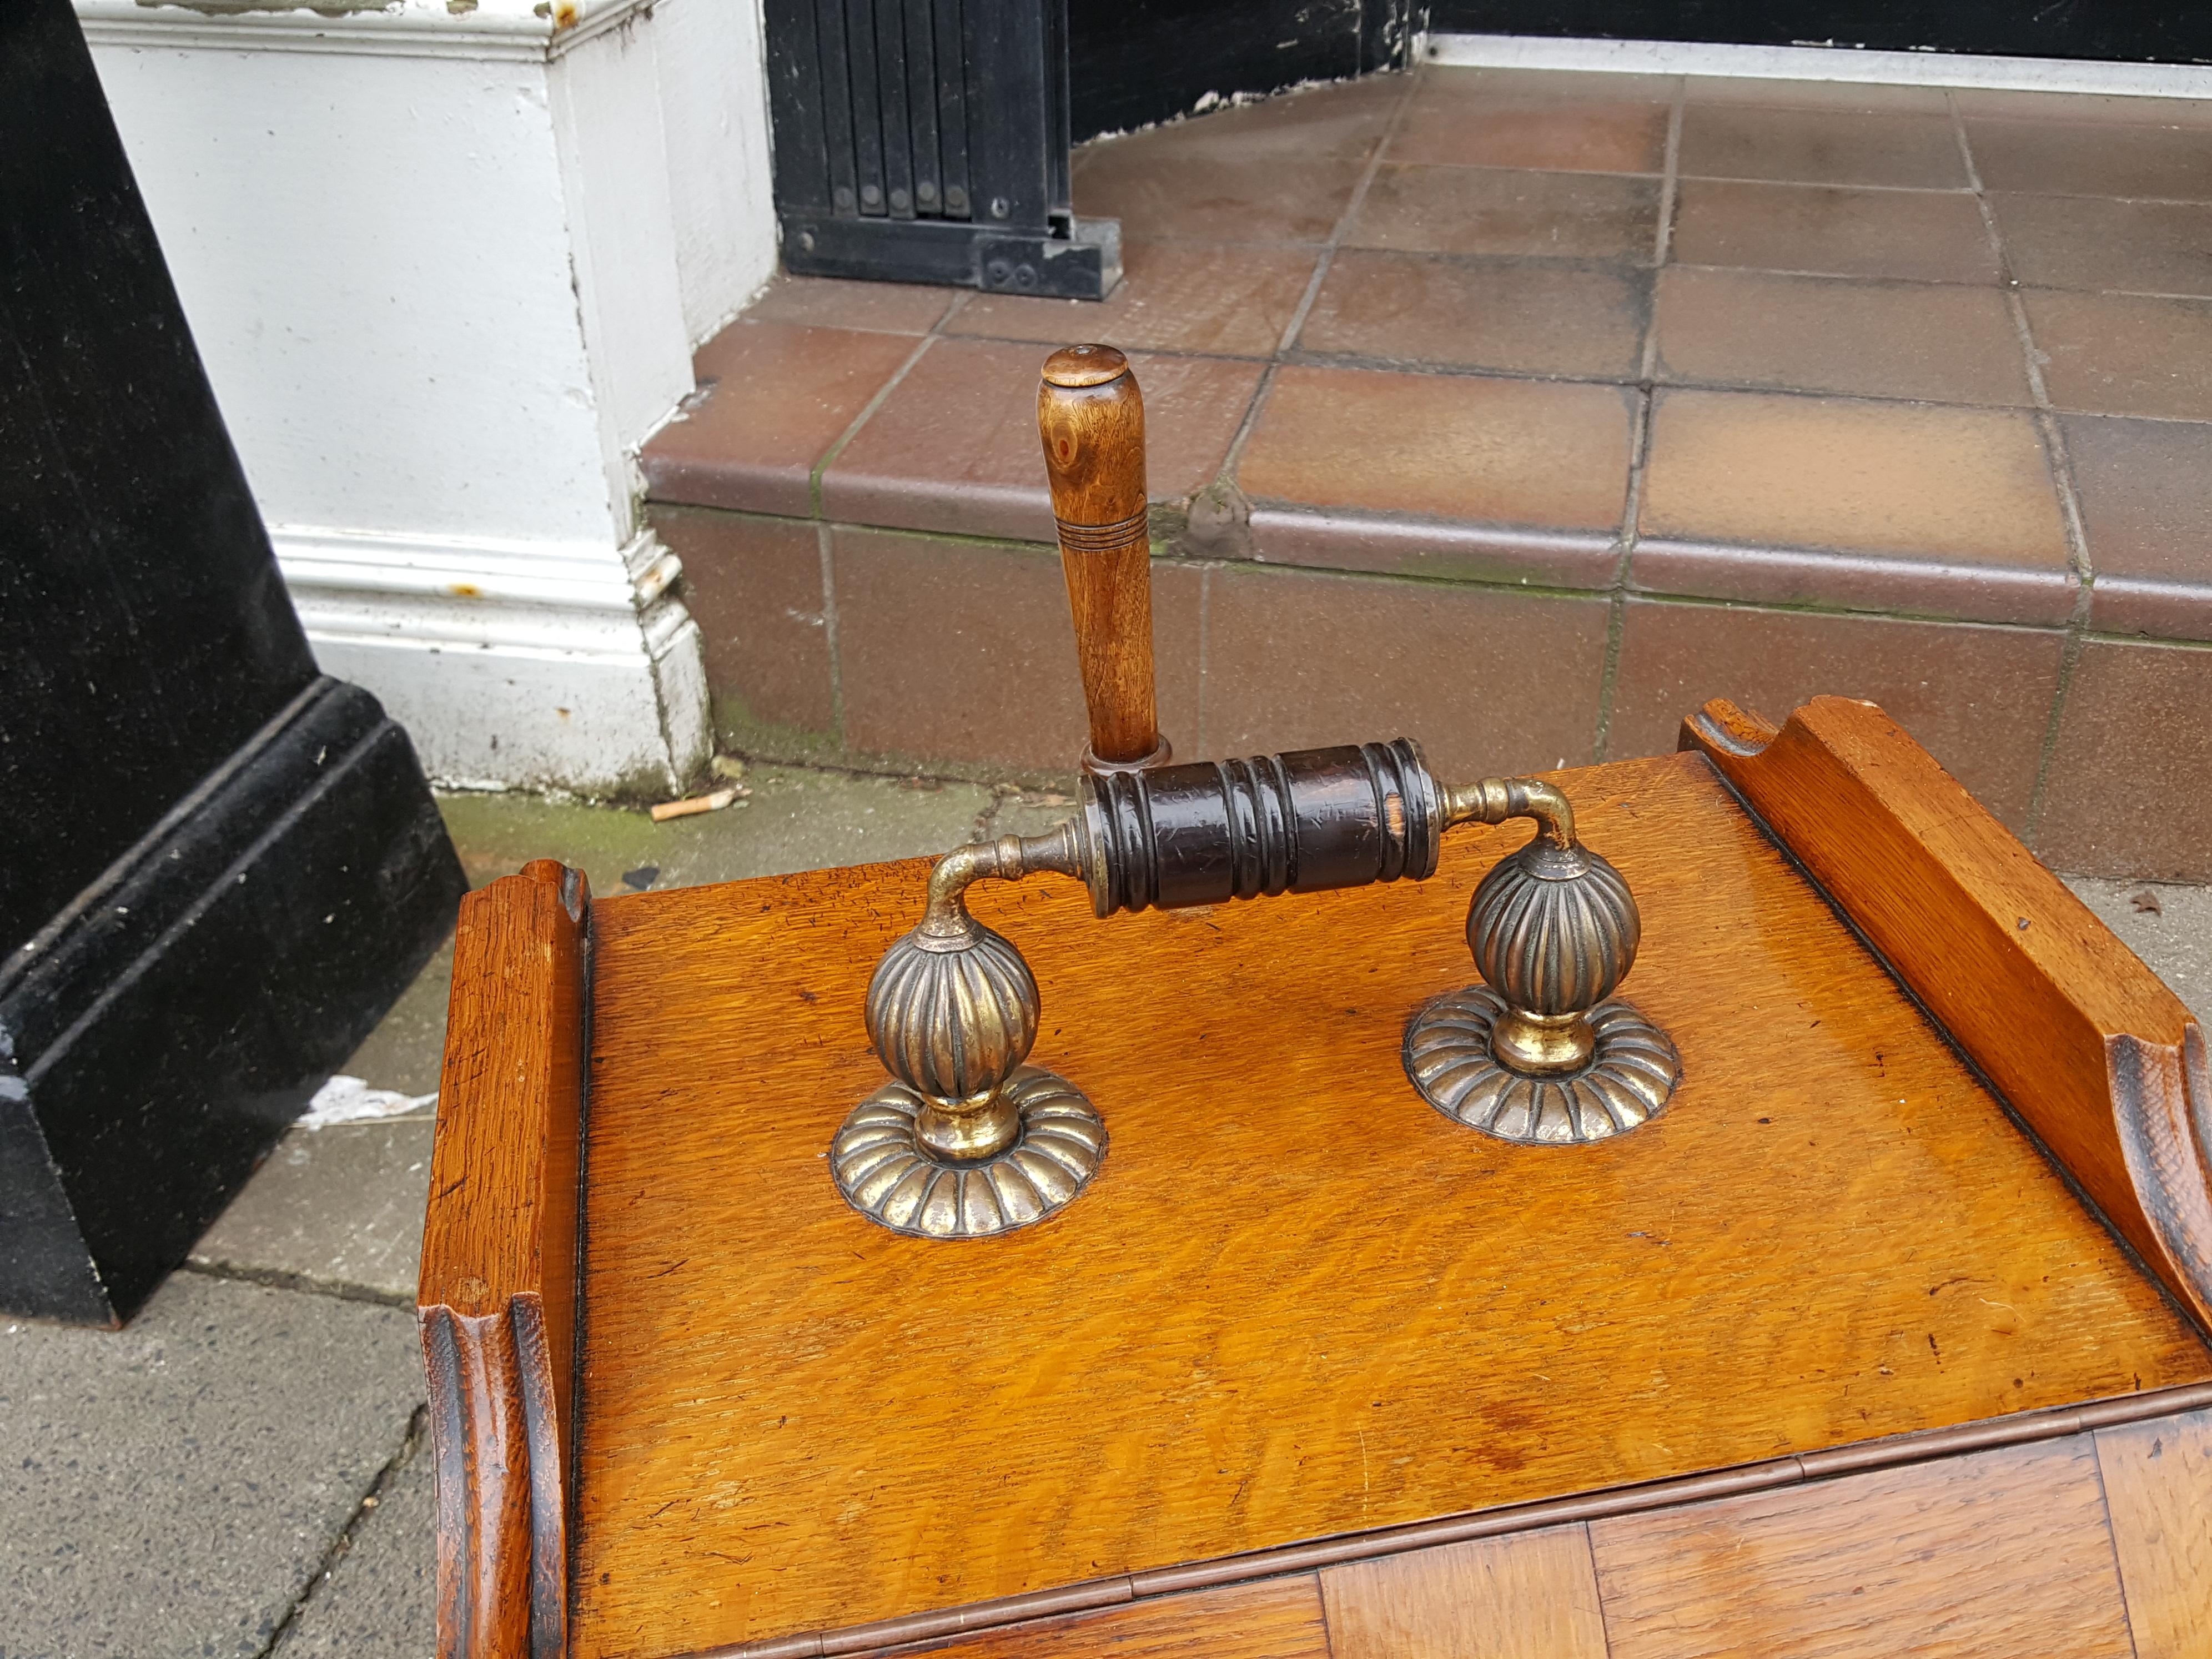 Late Victorian oak lidded coal scuttle receiver with liner and original shovel.
Measures: 14